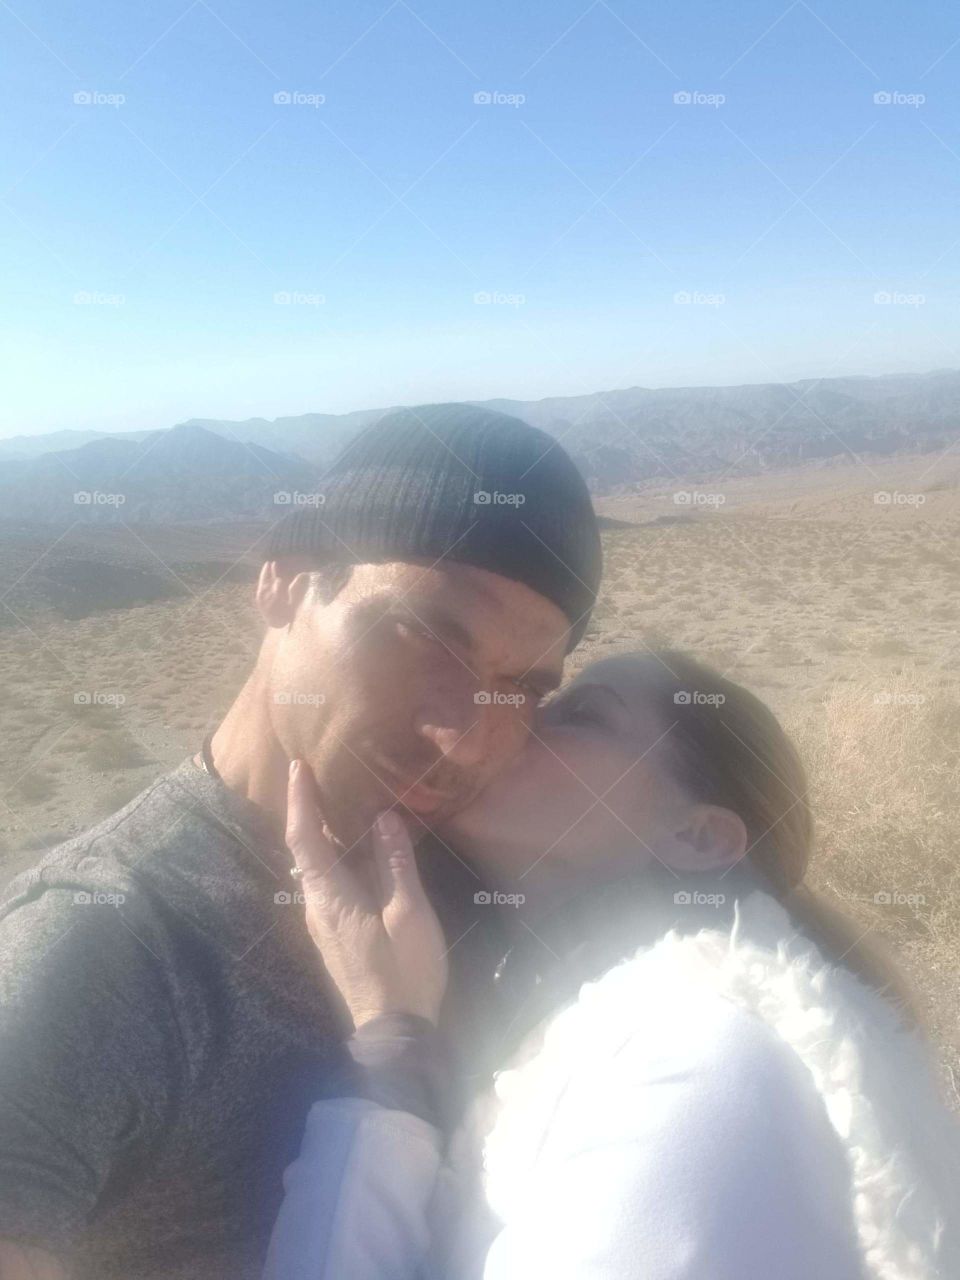 sweaty from the 45:,,min lo motorcycle ride to the desert look out; my love and I, we took a selfie and I stole a kiss, fogging up the camera lense